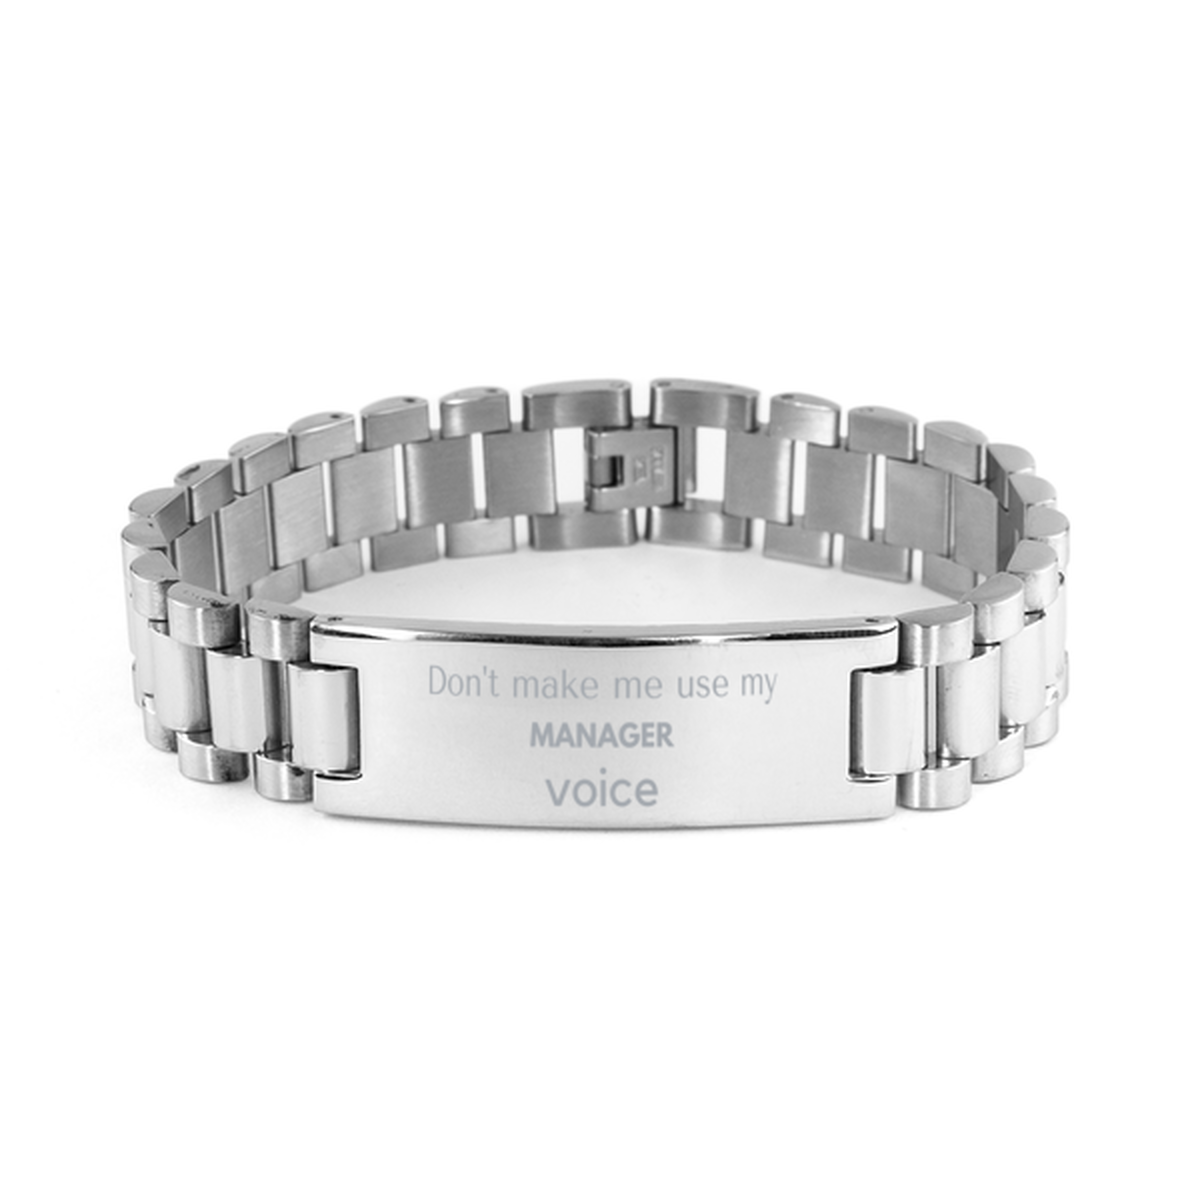 Don't make me use my Manager voice, Sarcasm Manager Gifts, Christmas Manager Ladder Stainless Steel Bracelet Birthday Unique Gifts For Manager Coworkers, Men, Women, Colleague, Friends